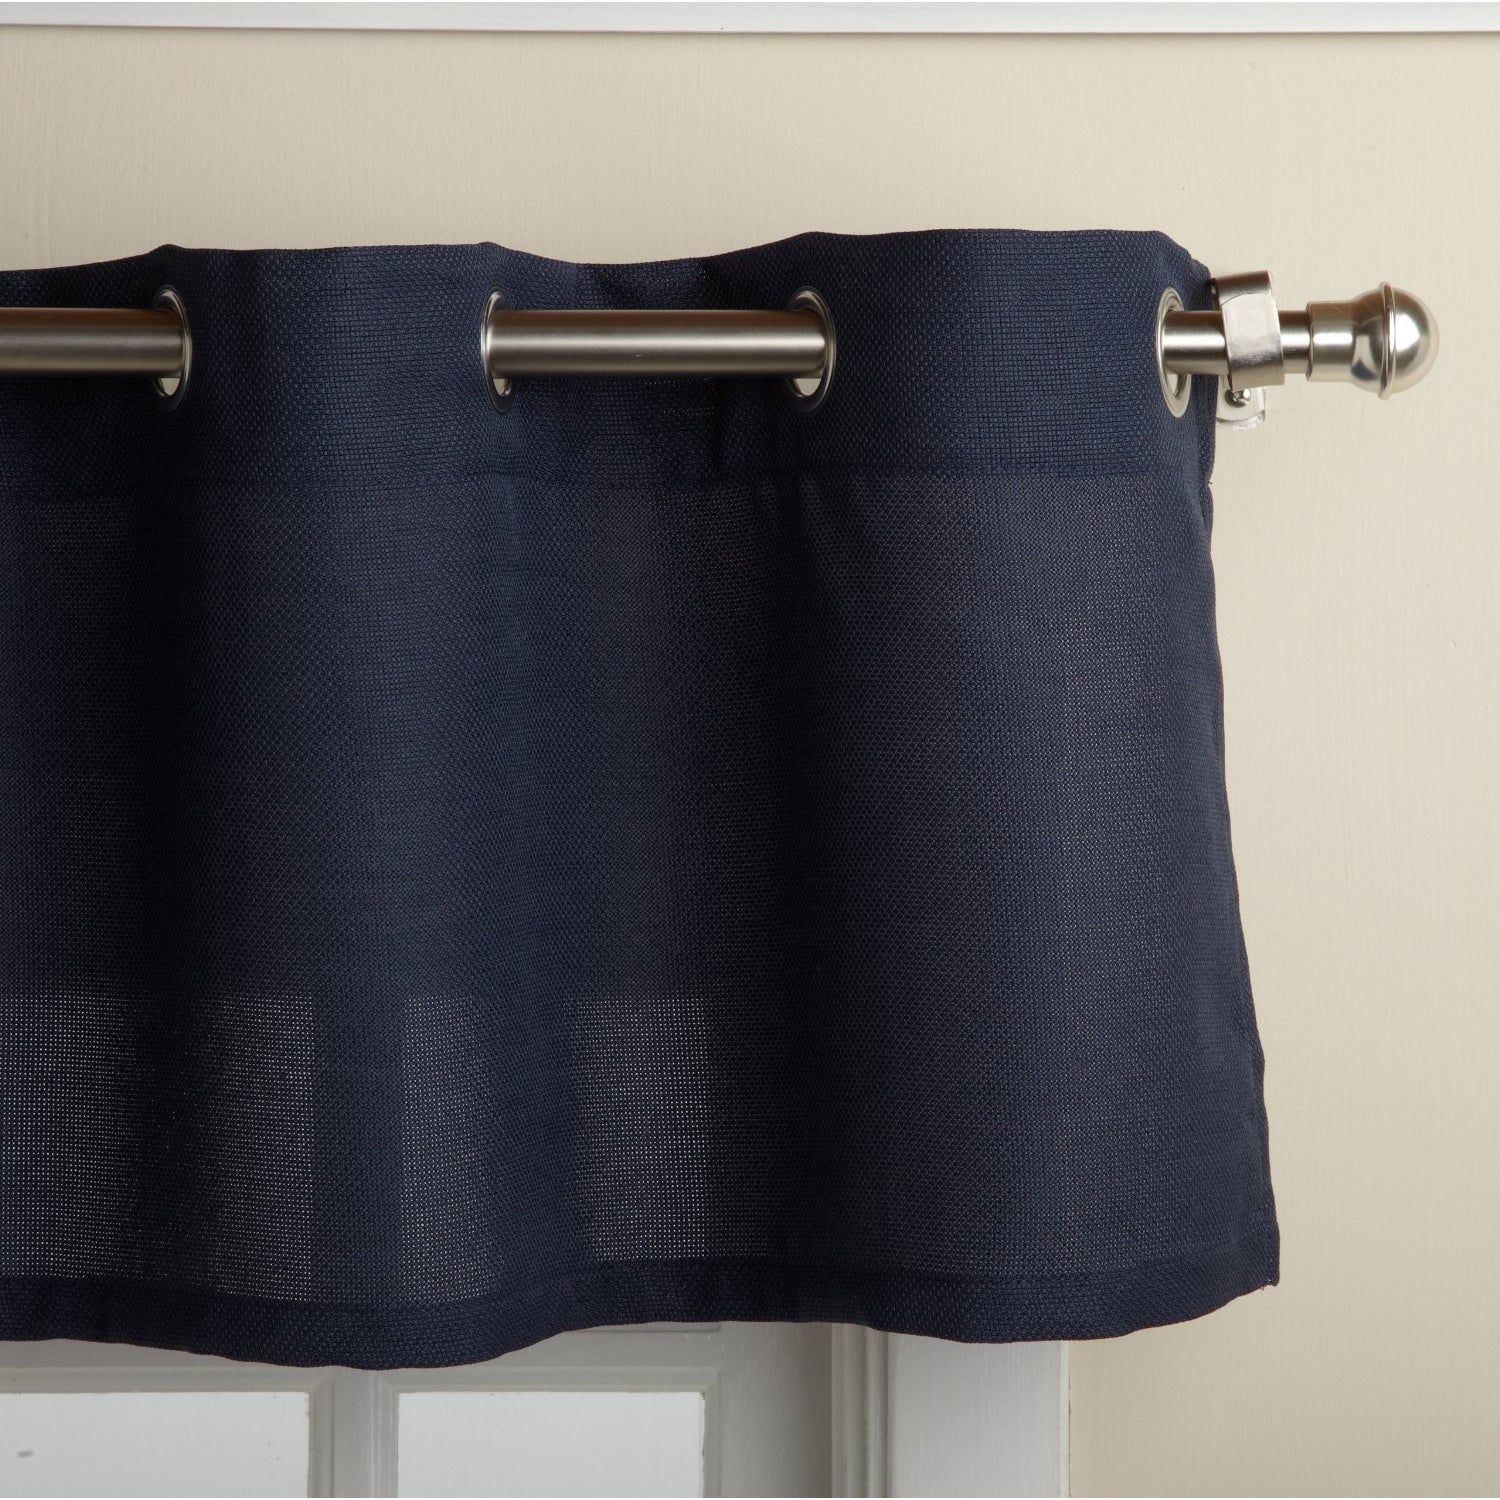 Modern Subtle Texture Solid Navy Kitchen Curtain Parts With Grommets  Tier  And Valance Options Regarding Modern Subtle Texture Solid Red Kitchen Curtains (Photo 15 of 20)